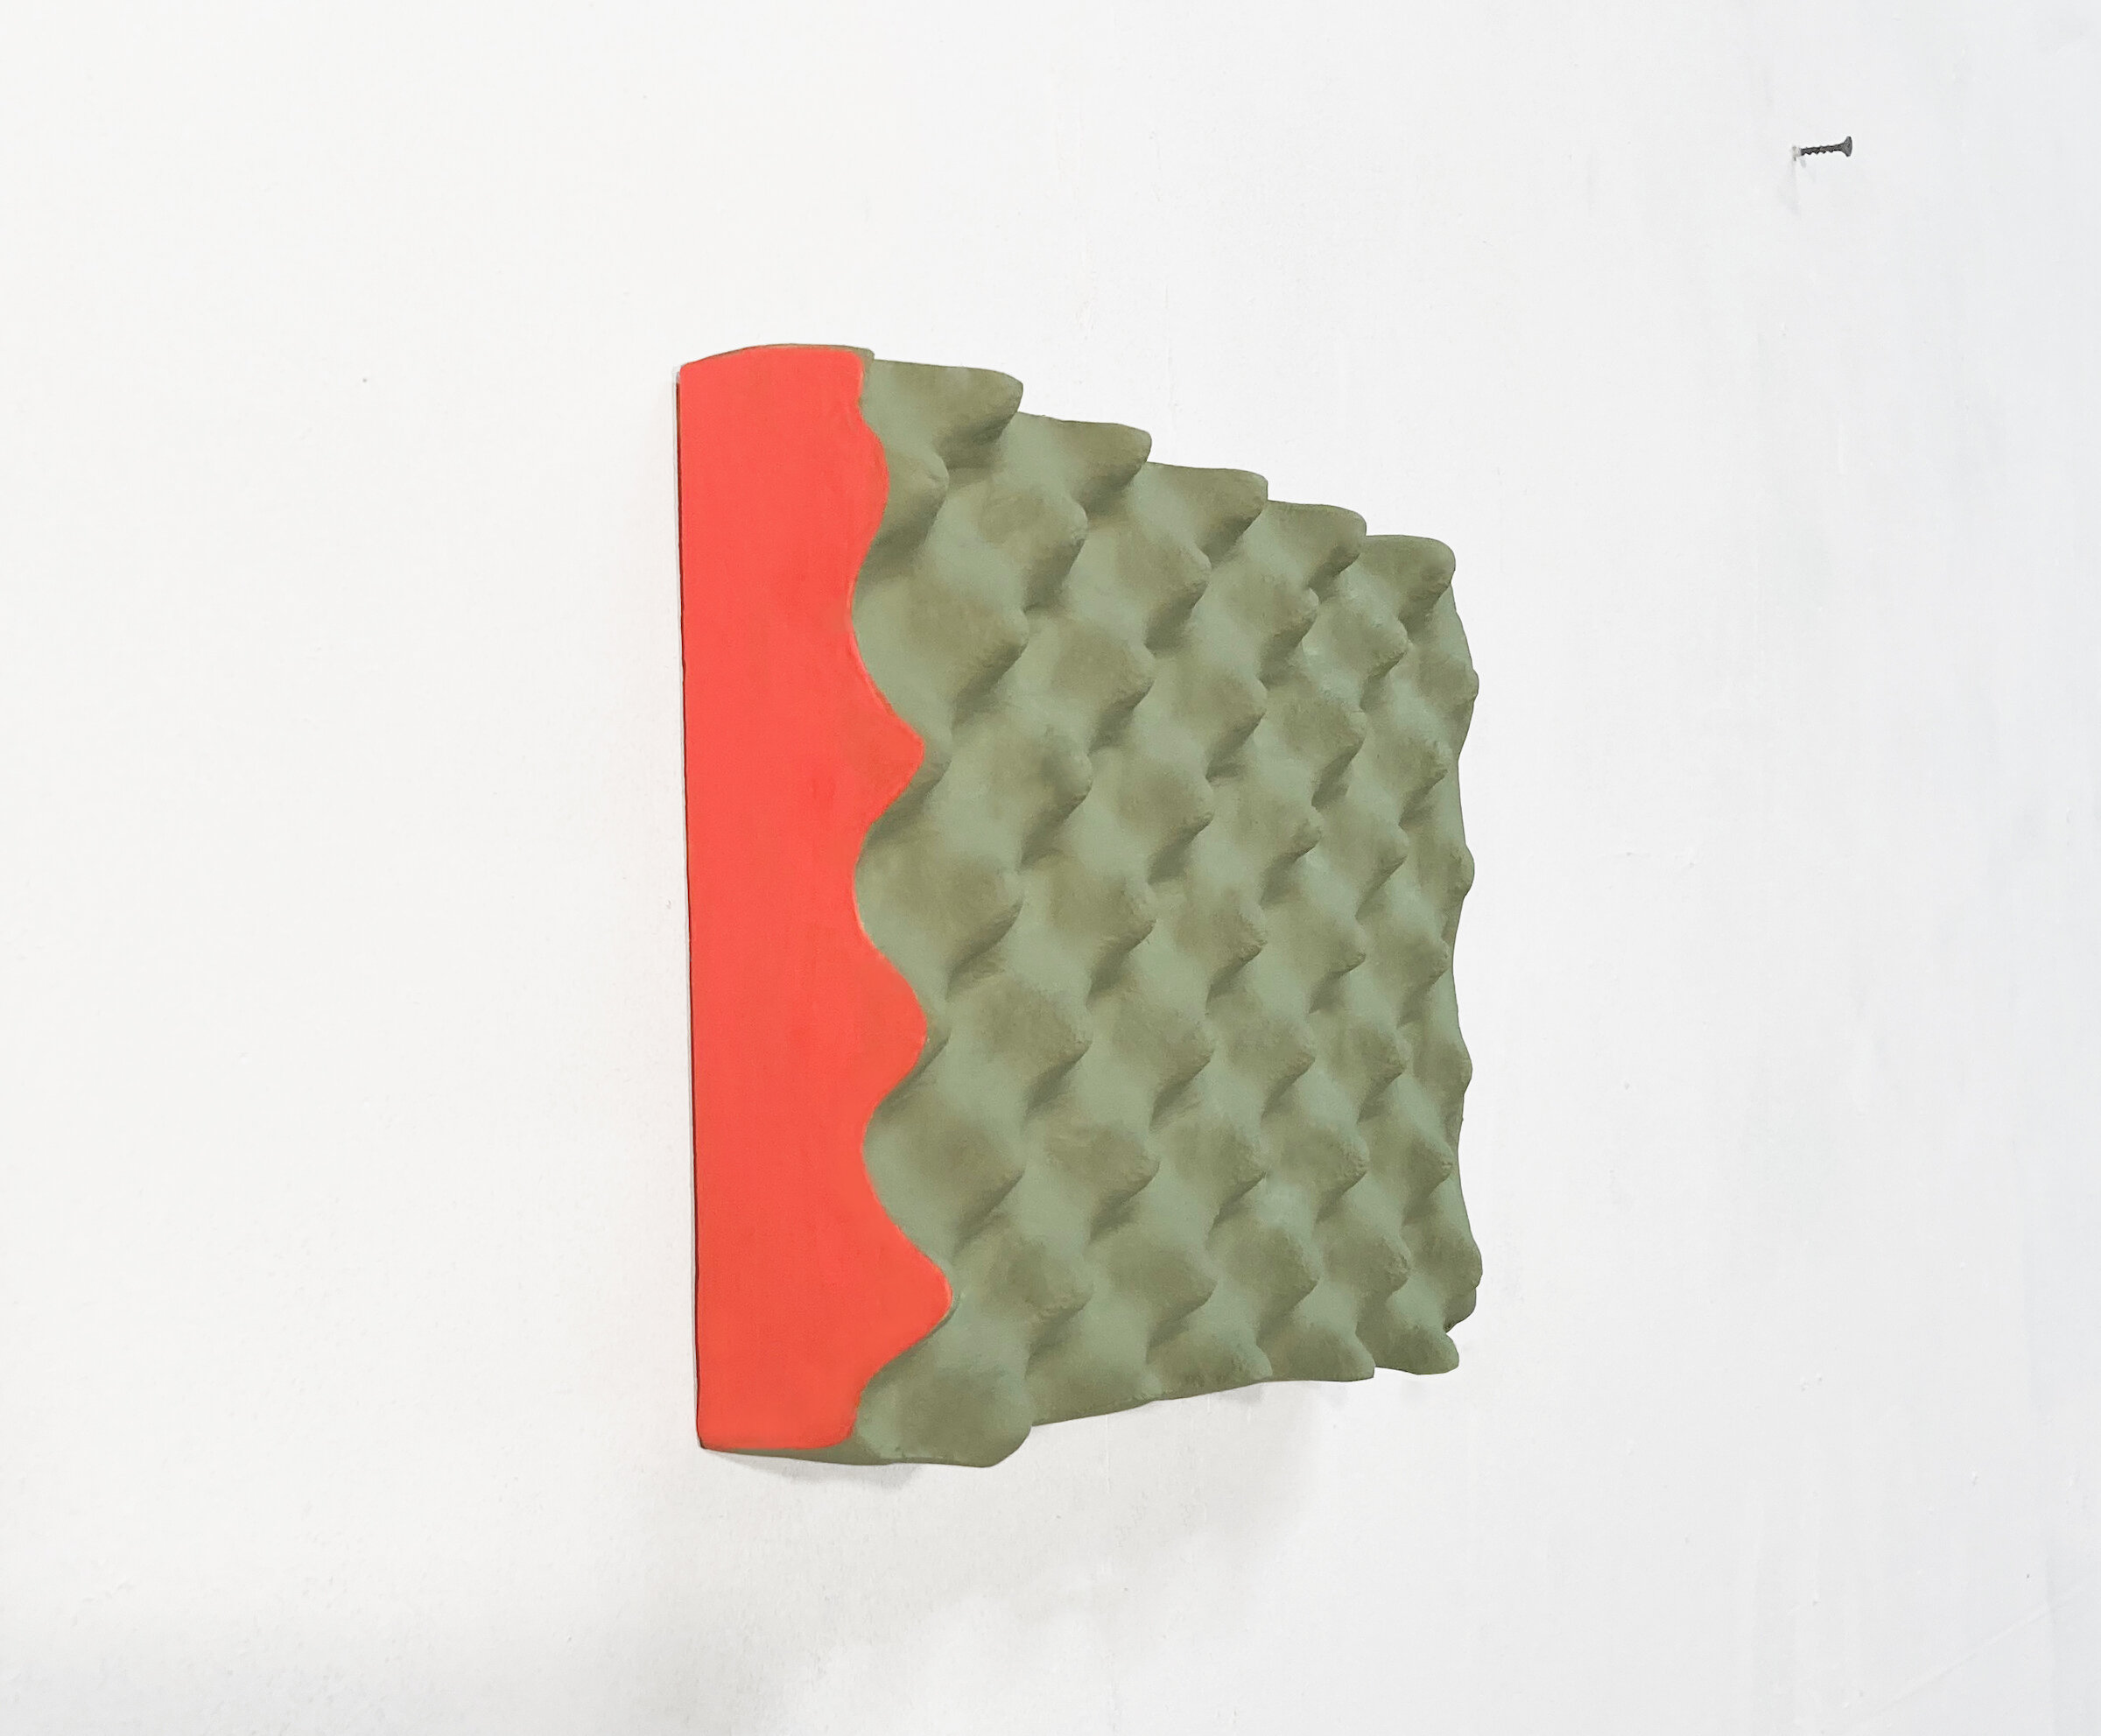  Giulia Piera Livi,  Untitled (green with coral),  2020. Mixed media, foam, flashe (with screw), 8 x 10 x 2 in.     